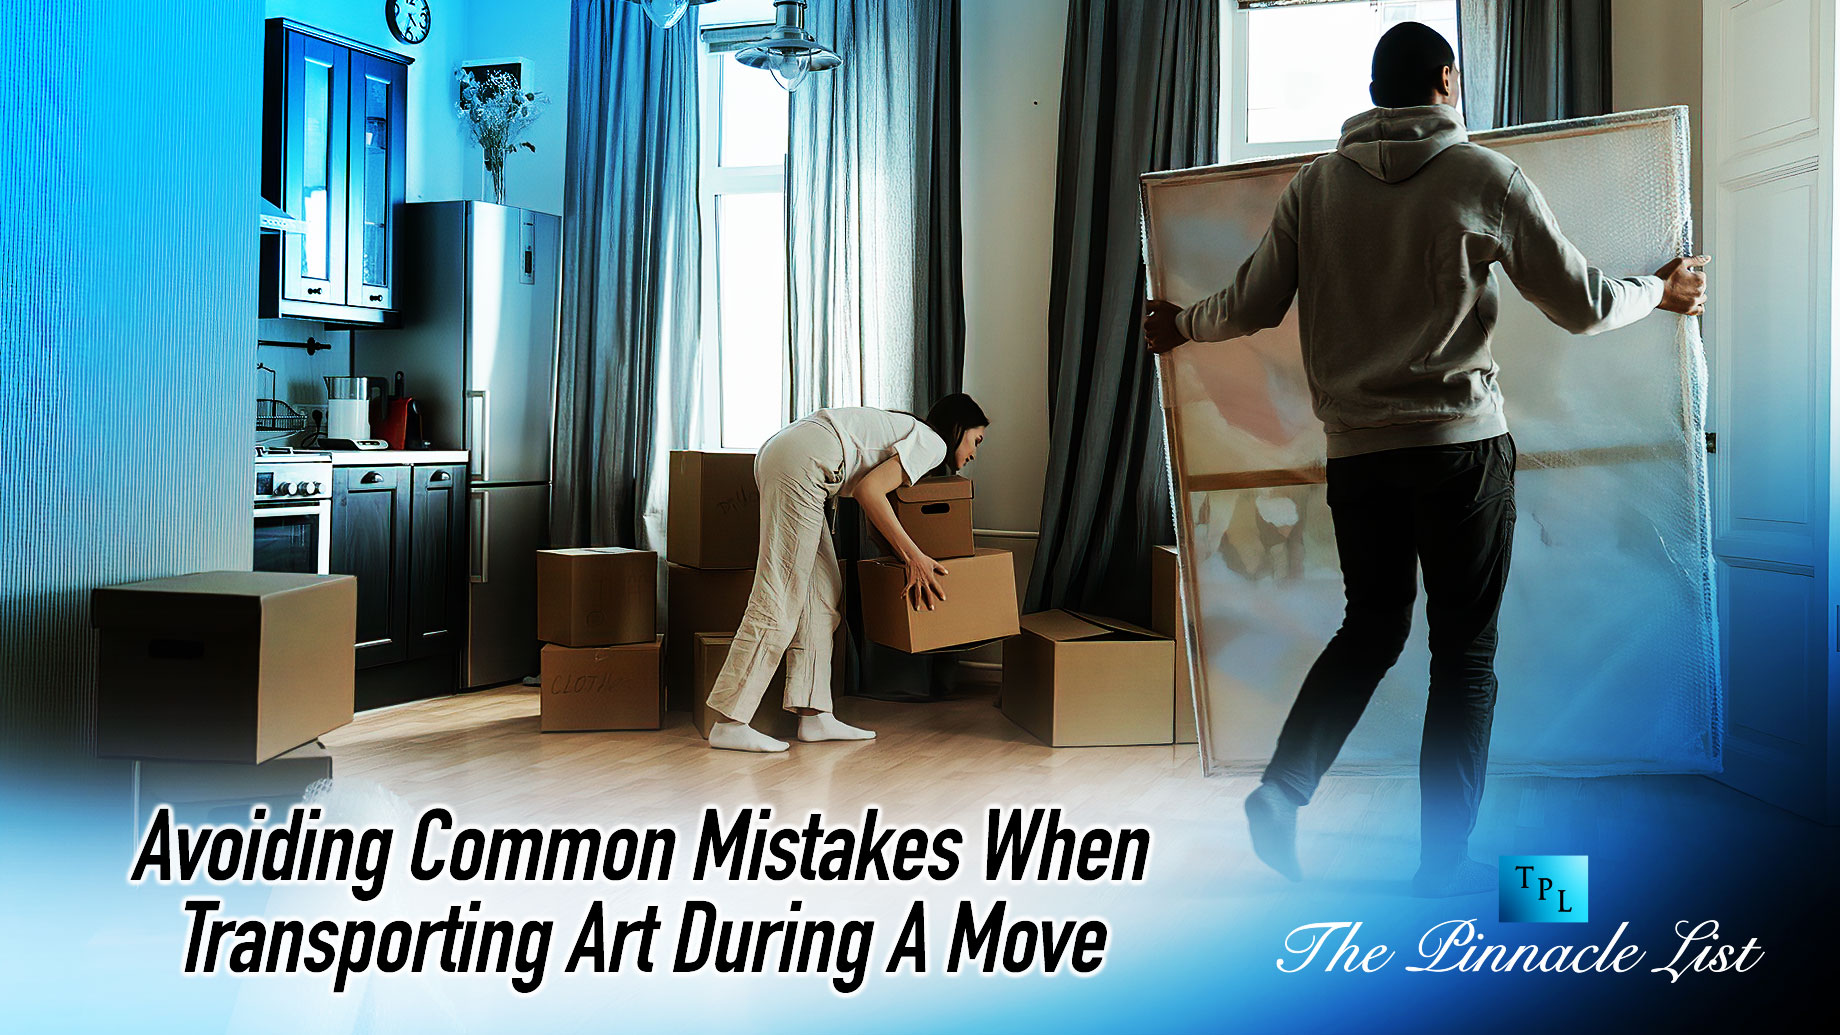 Avoiding Common Mistakes When Transporting Art During A Move